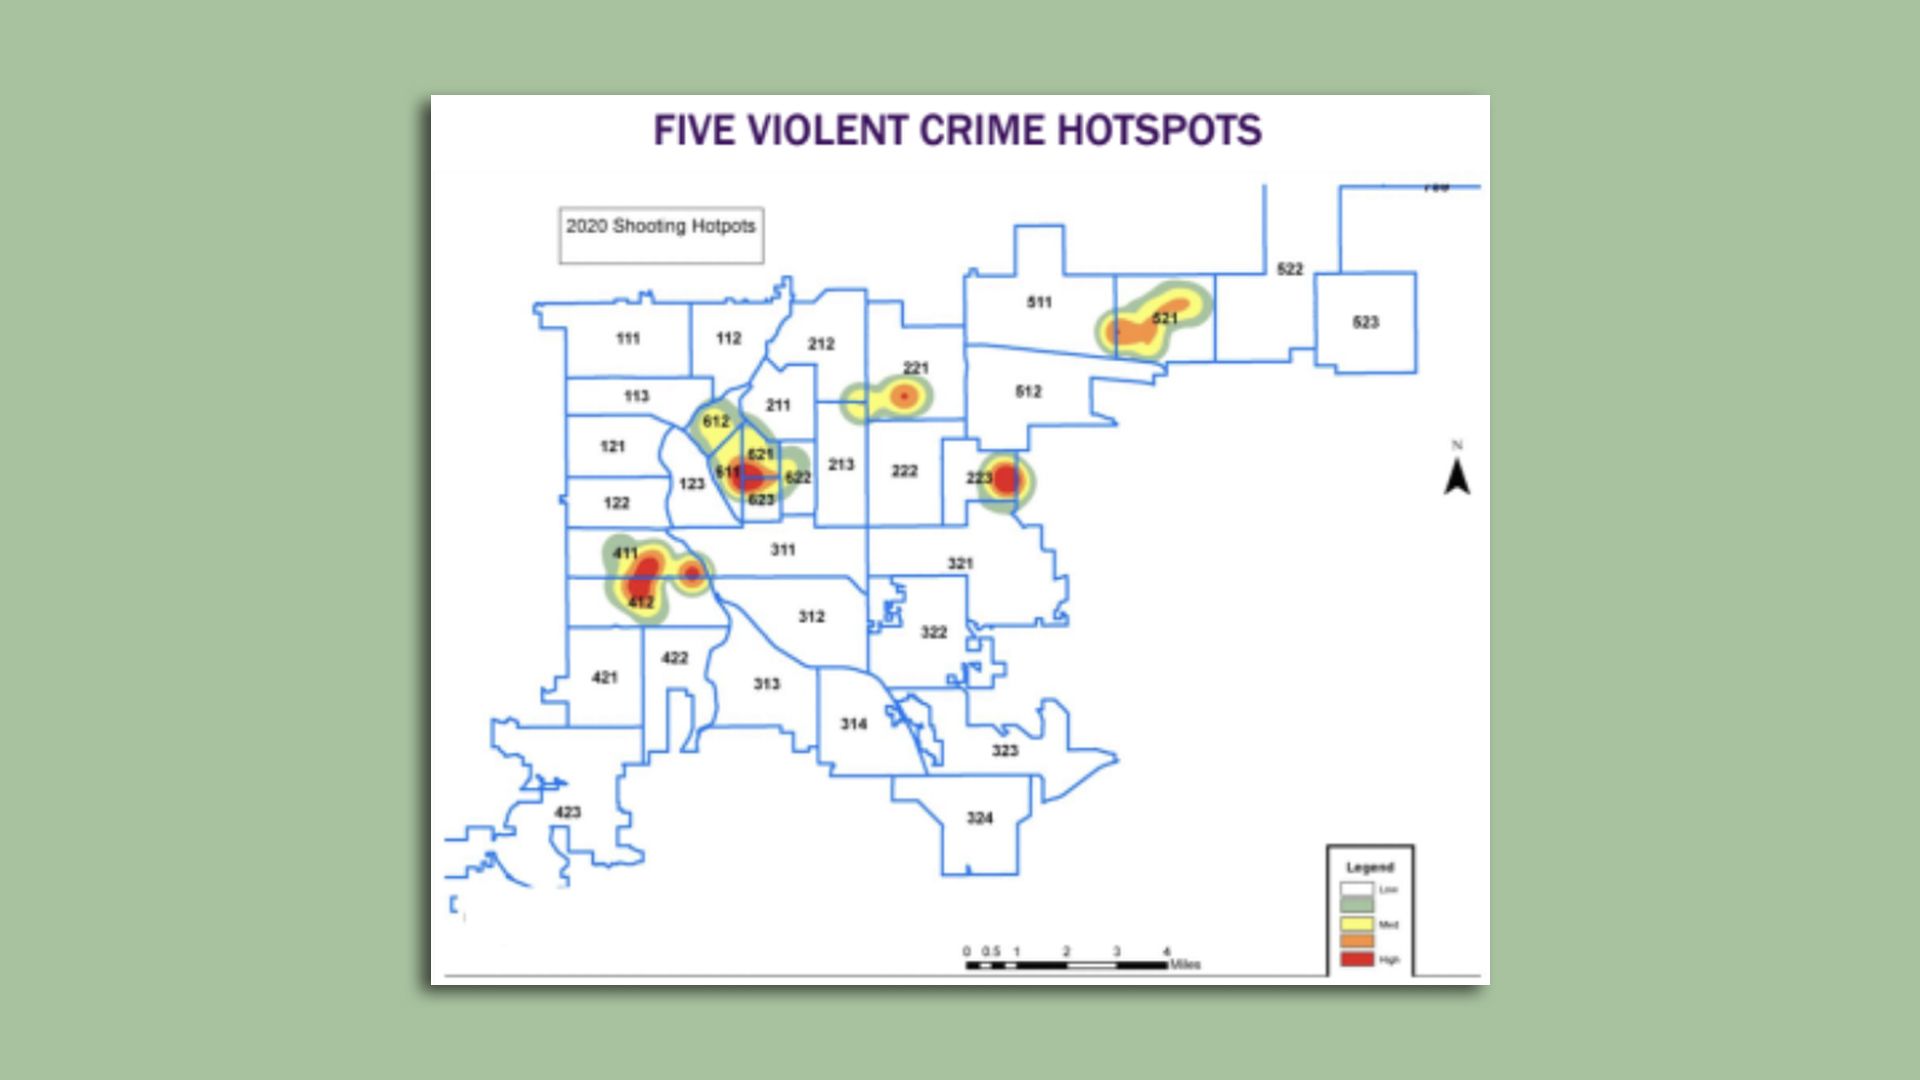 A map of Denver showing the hotspots for shootings in 2020